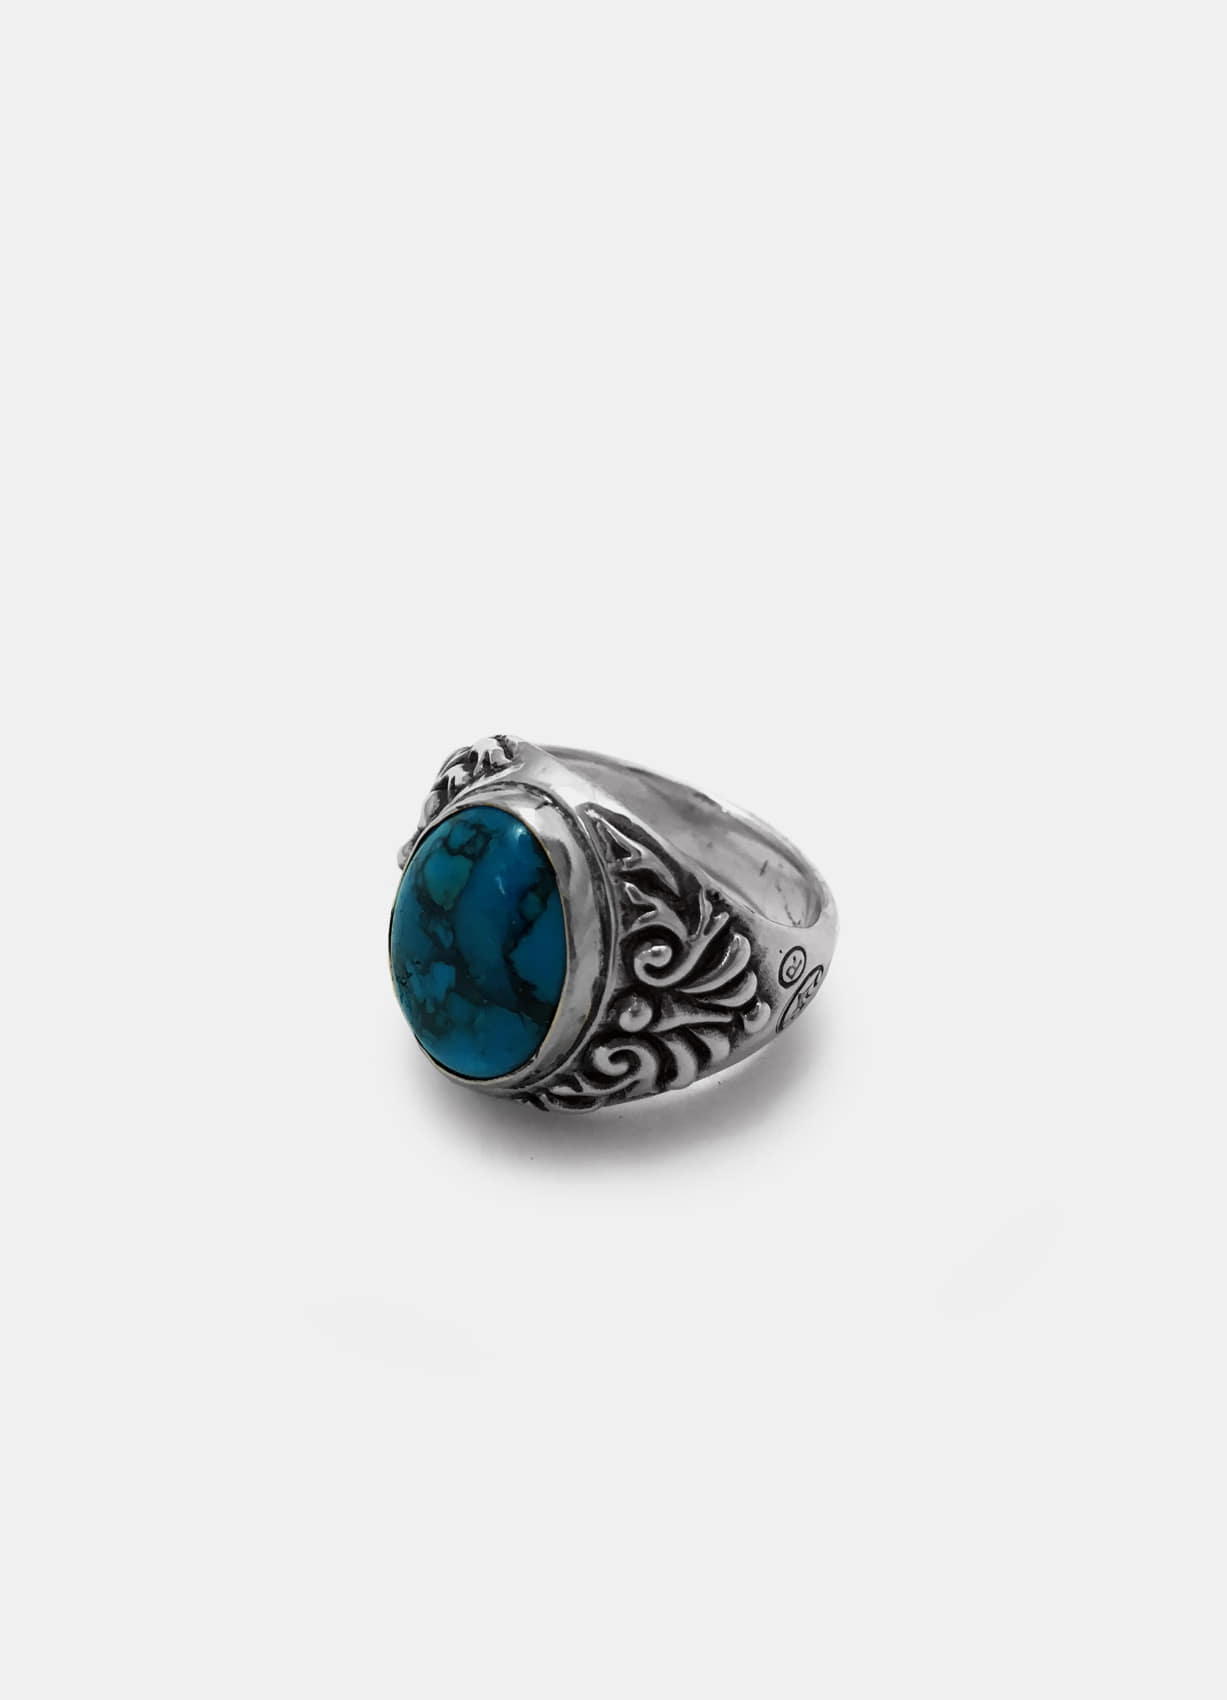 TURQUOISE CABOCHON RING